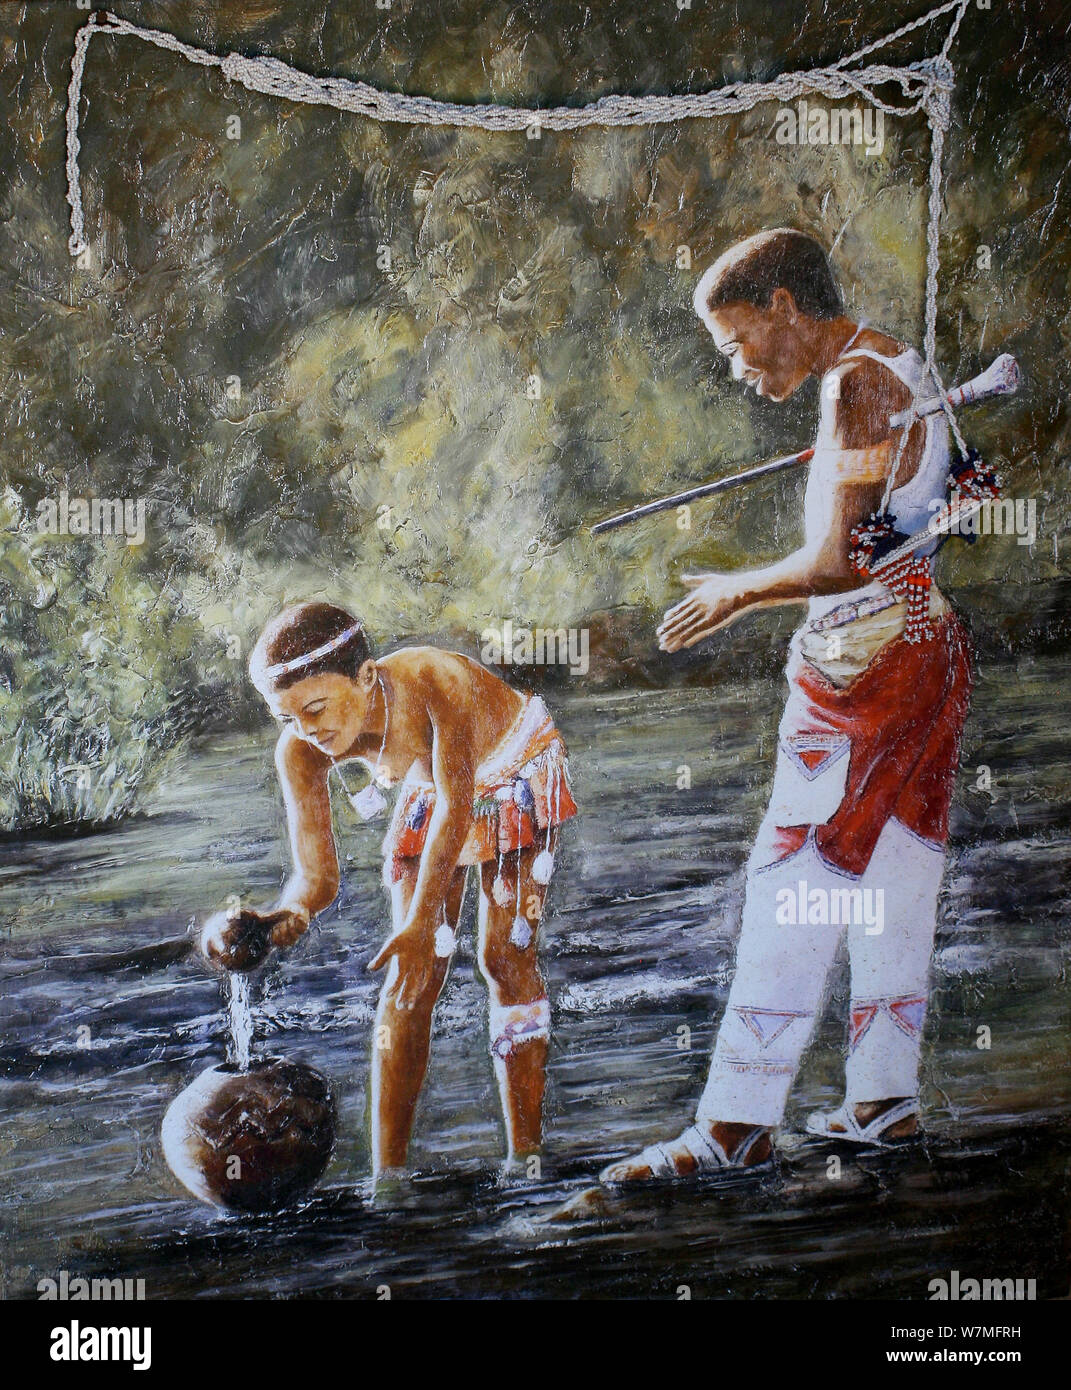 Painting depicting a Zulu proposal of marriage down by the river at Shakaland Zulu Cultural Village, Eshowe, Kwazulu Natal, South Africa Stock Photo